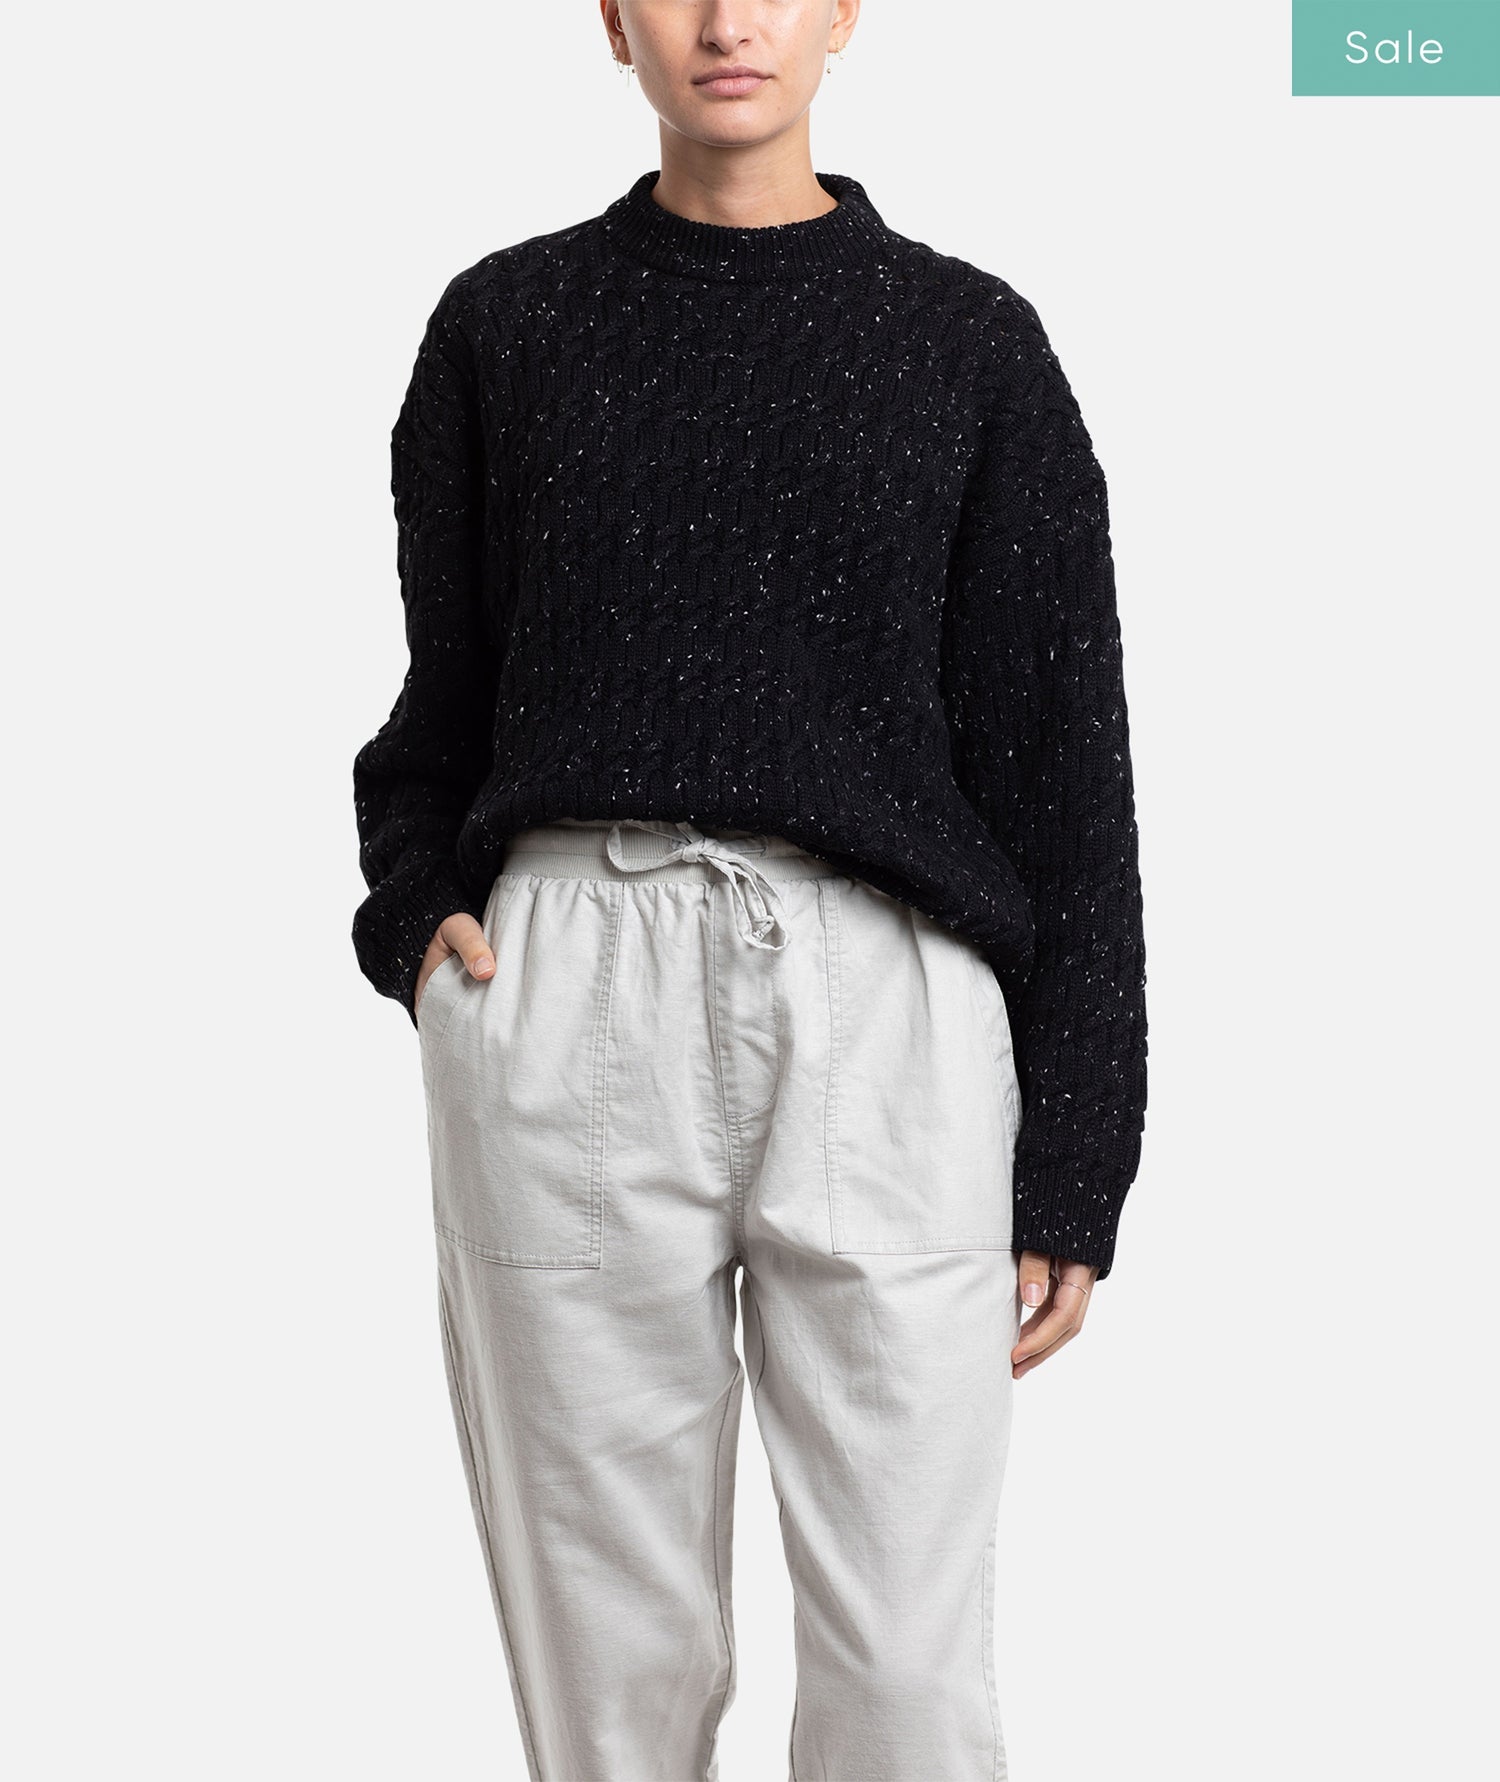 Group: Wharf Cable Knit Sweater